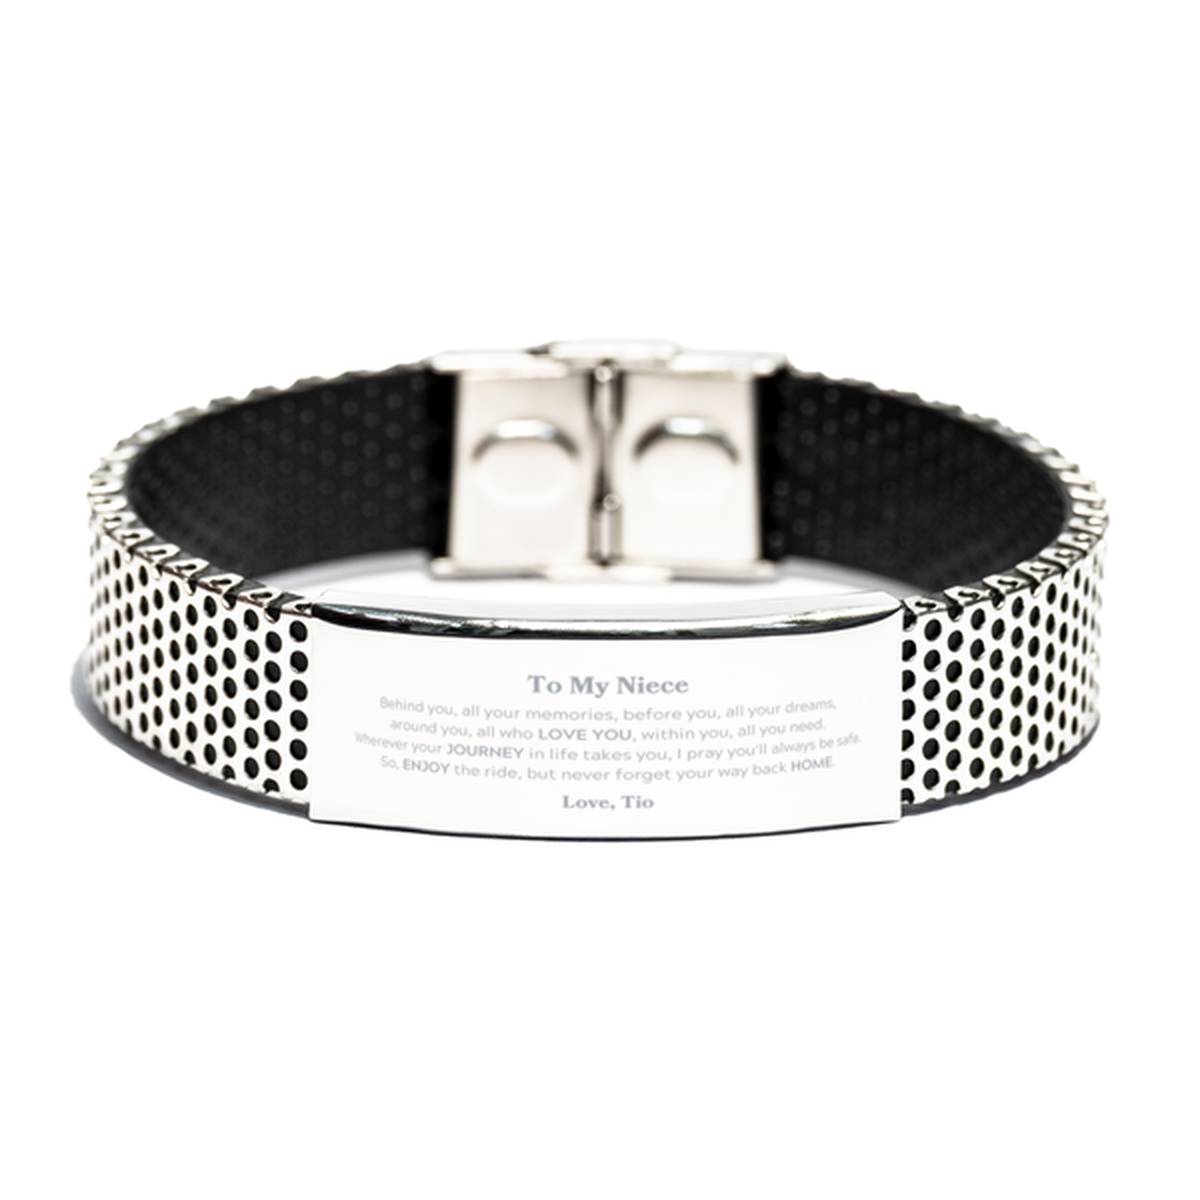 To My Niece Graduation Gifts from Tio, Niece Stainless Steel Bracelet Christmas Birthday Gifts for Niece Behind you, all your memories, before you, all your dreams. Love, Tio